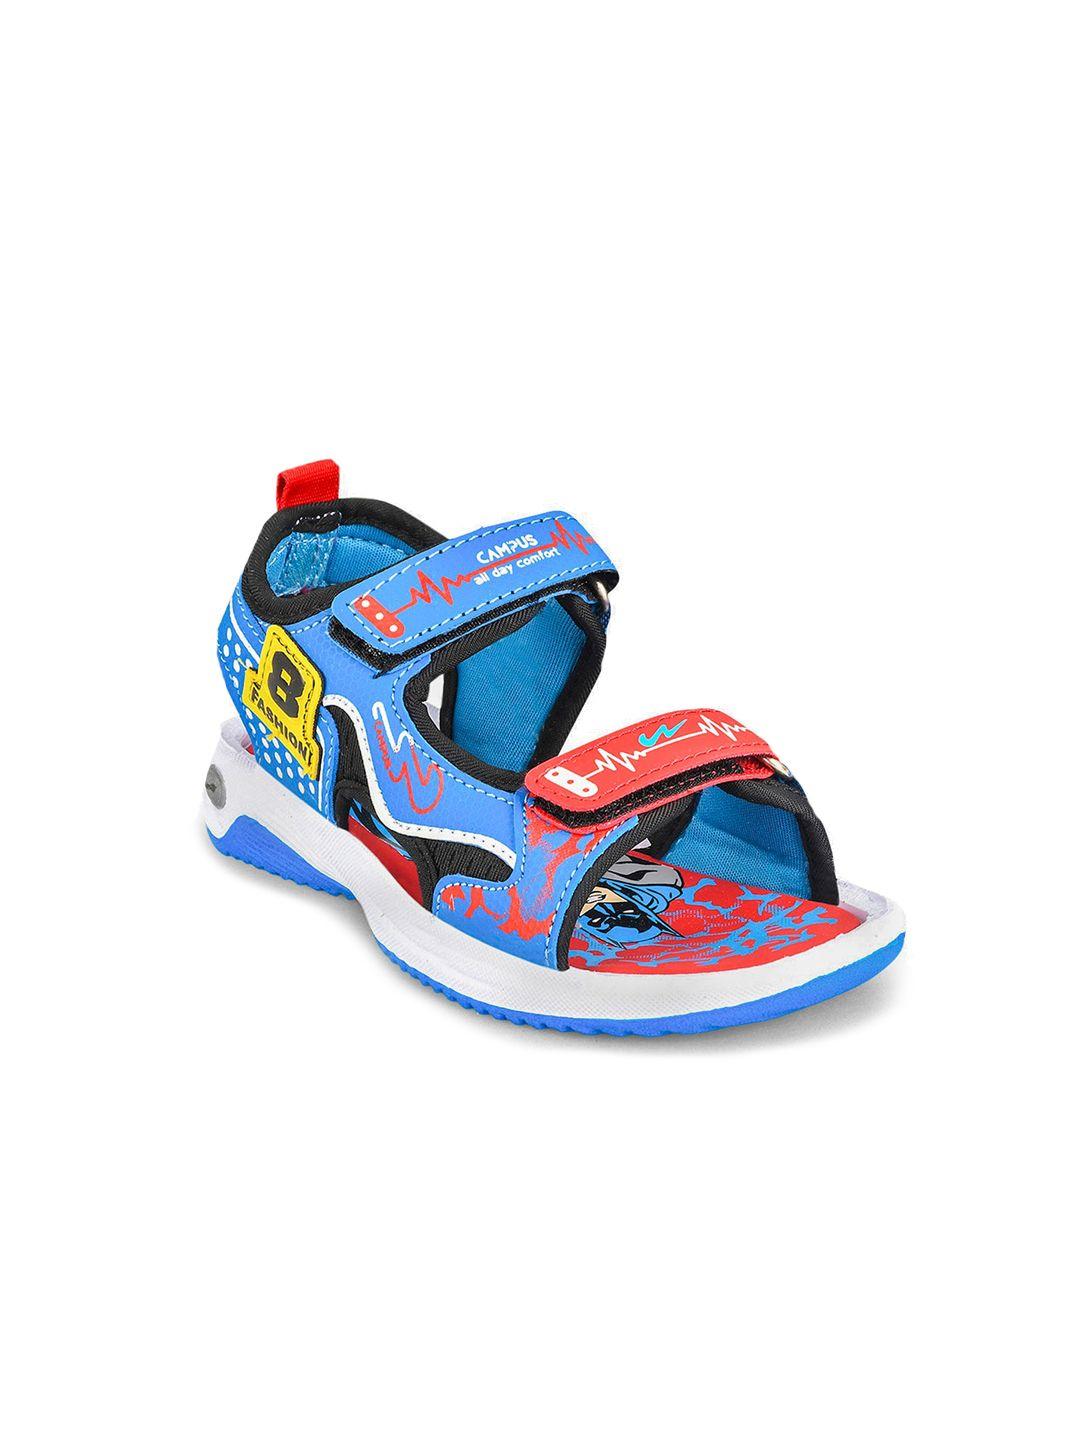 Campus Kids Patterned Sports Sandals